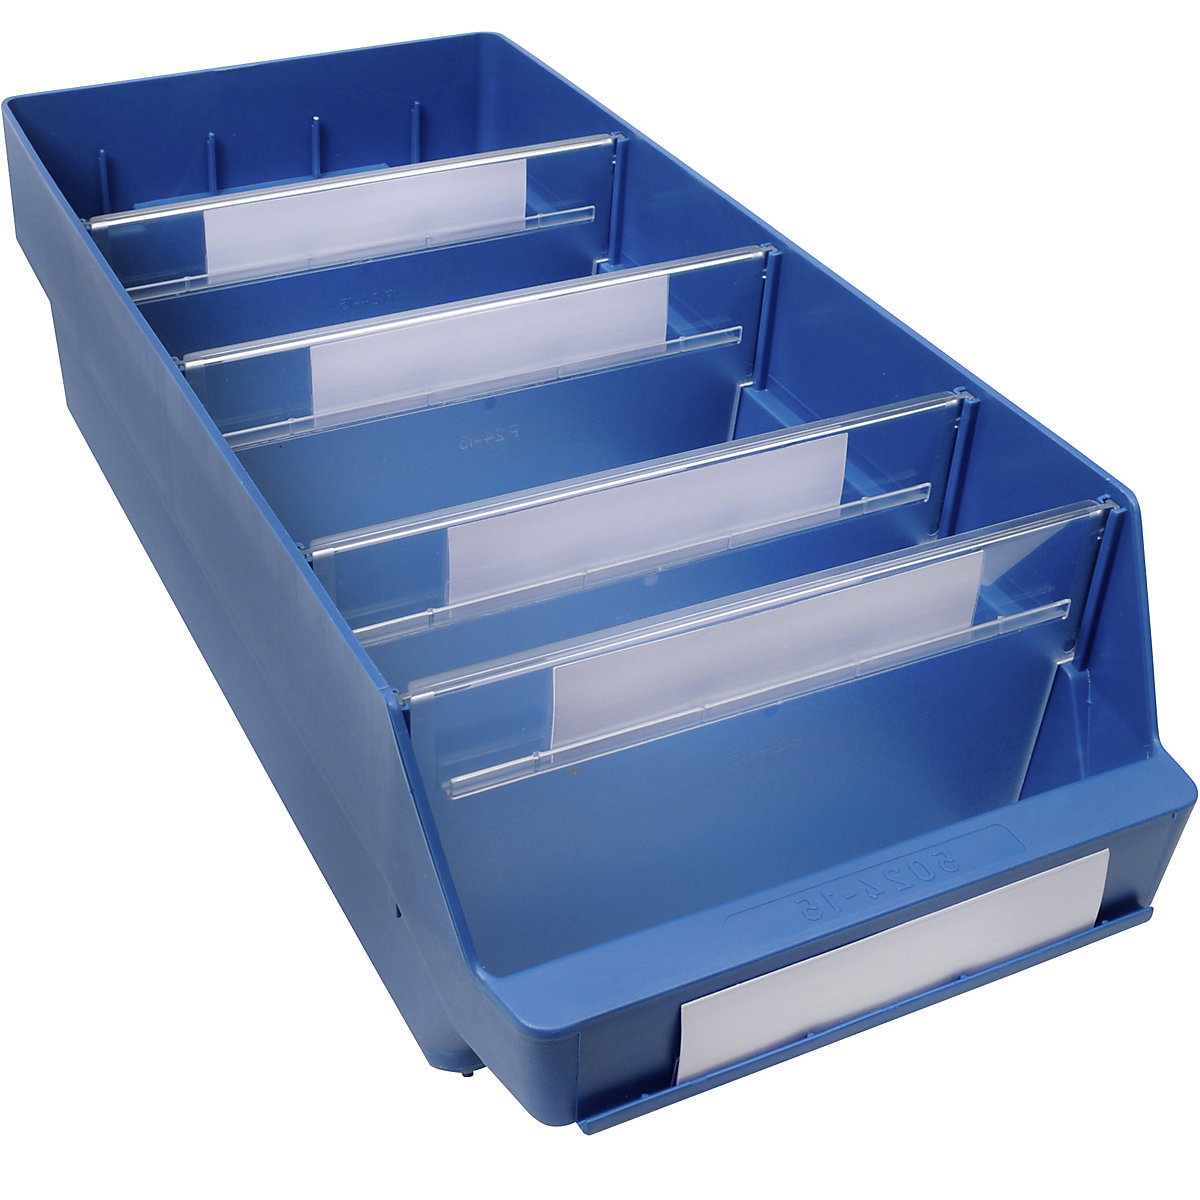 Shelf bin made of highly impact resistant polypropylene – STEMO, blue, LxWxH 500 x 240 x 150 mm, pack of 10-13